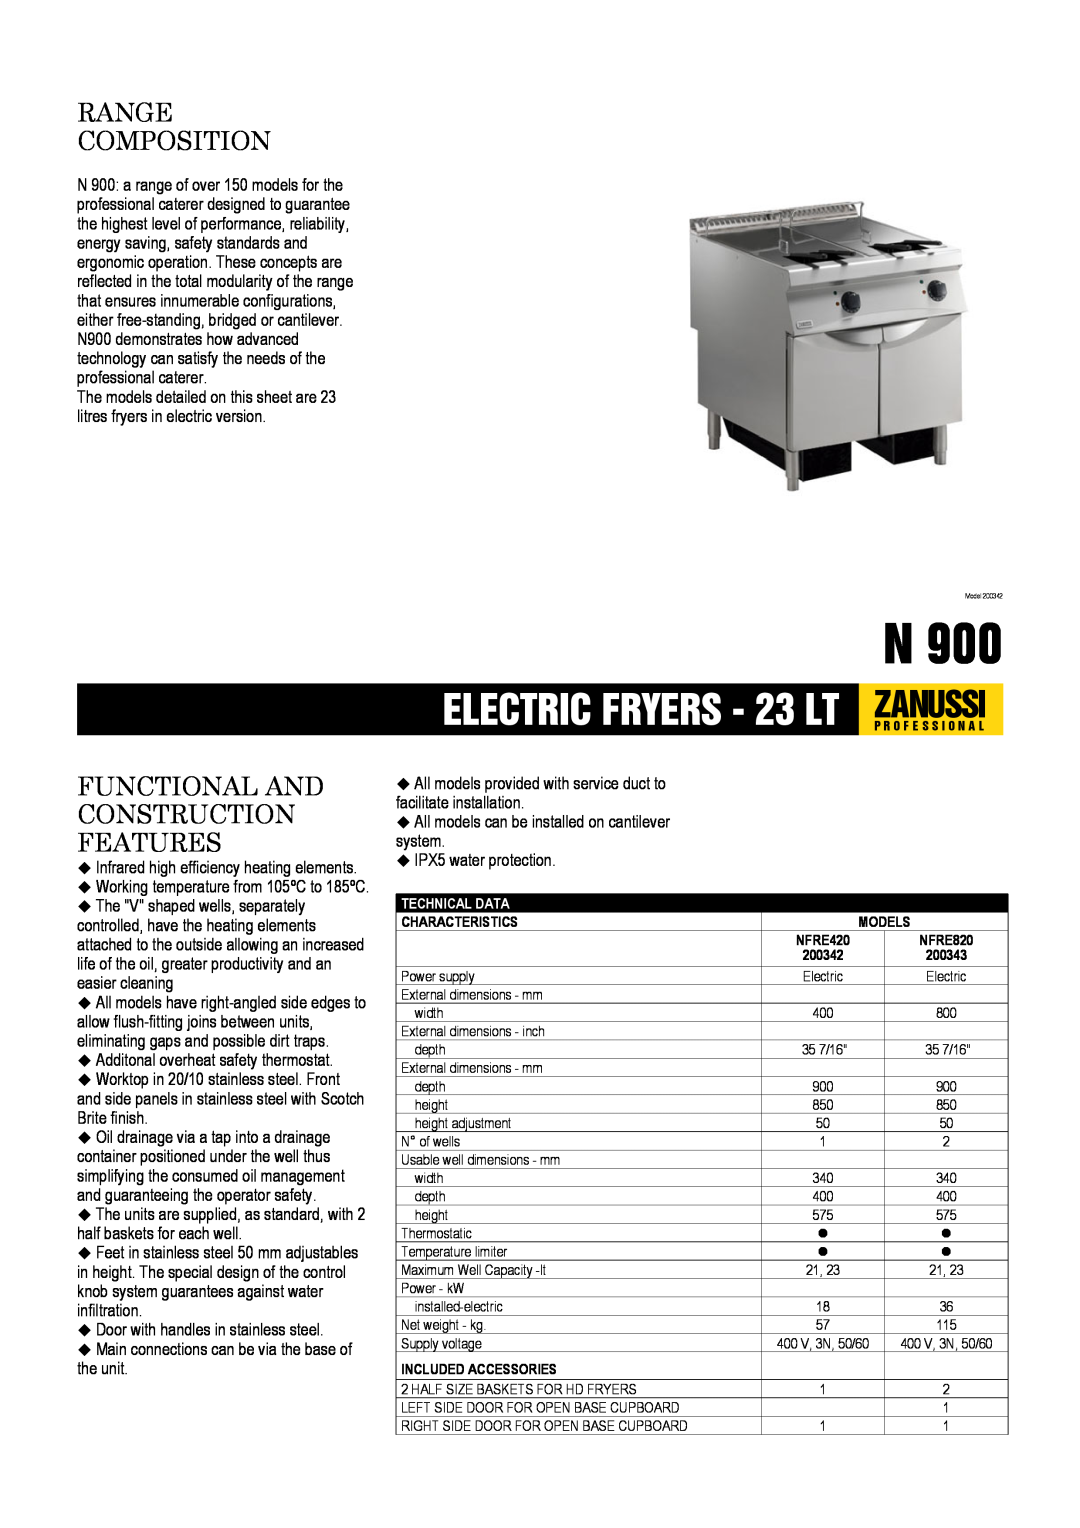 Electrolux NFRE820 dimensions Zanussi, ELECTRIC FRYERS - 23 LT, Range Composition, Functional And Construction Features 